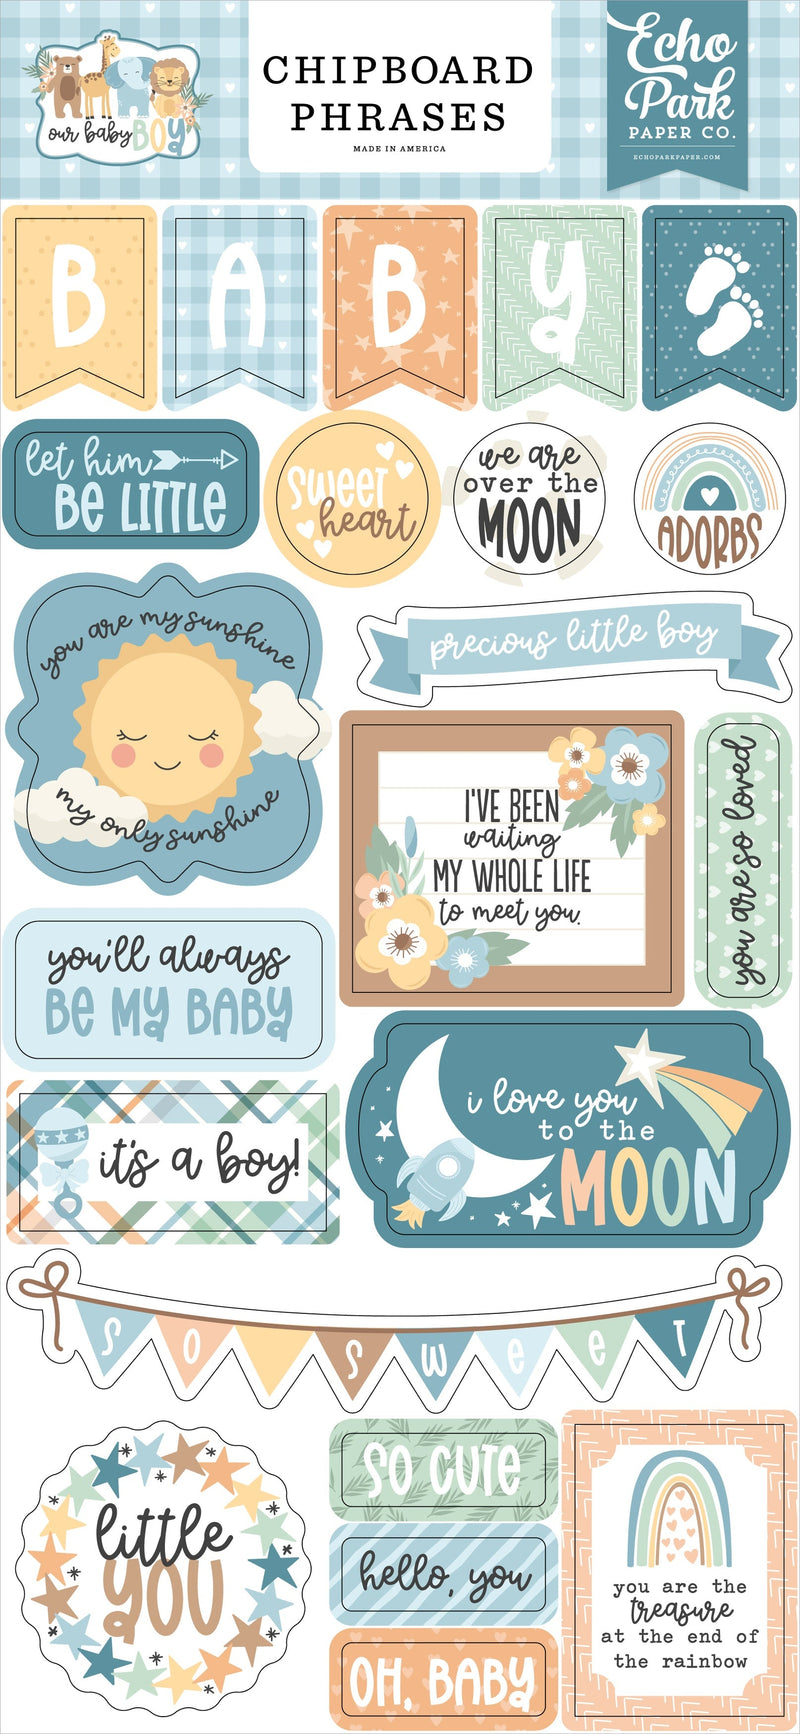 Our Baby Boy Chipboard Phrases